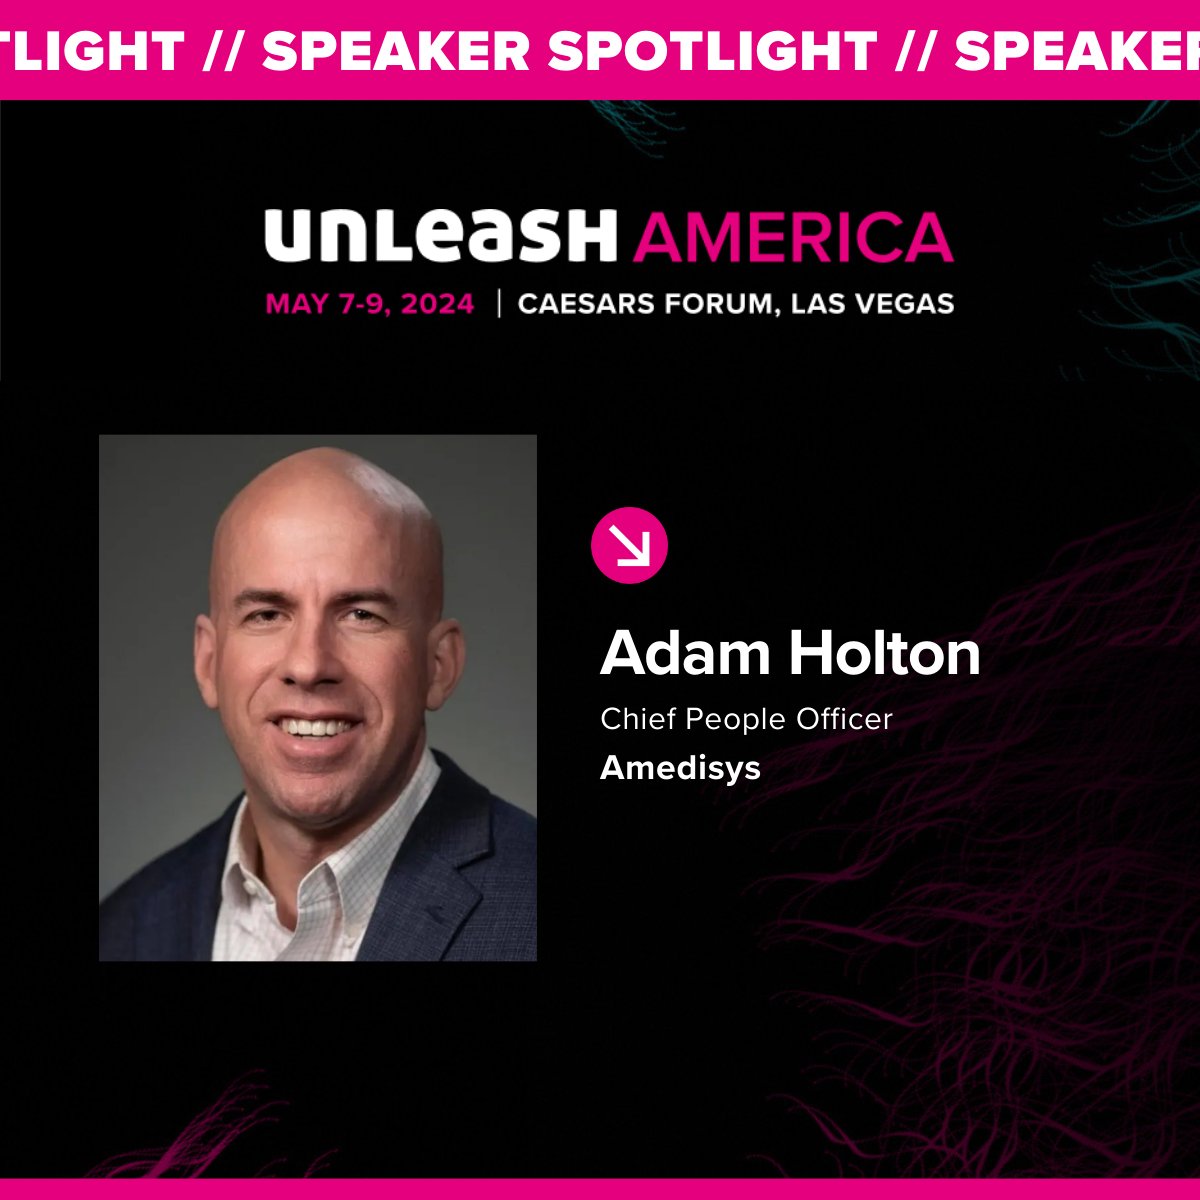 You don't want to miss this strategic case study led by Adam Holton, Chief People Officer, Amedisys, which converts focused plans into effective actions at #UNLEASHAMERICA! Get your ticket now: bit.ly/3x87sCo #HRInnovation #HRtech #FutureOfWork #DigitalHR